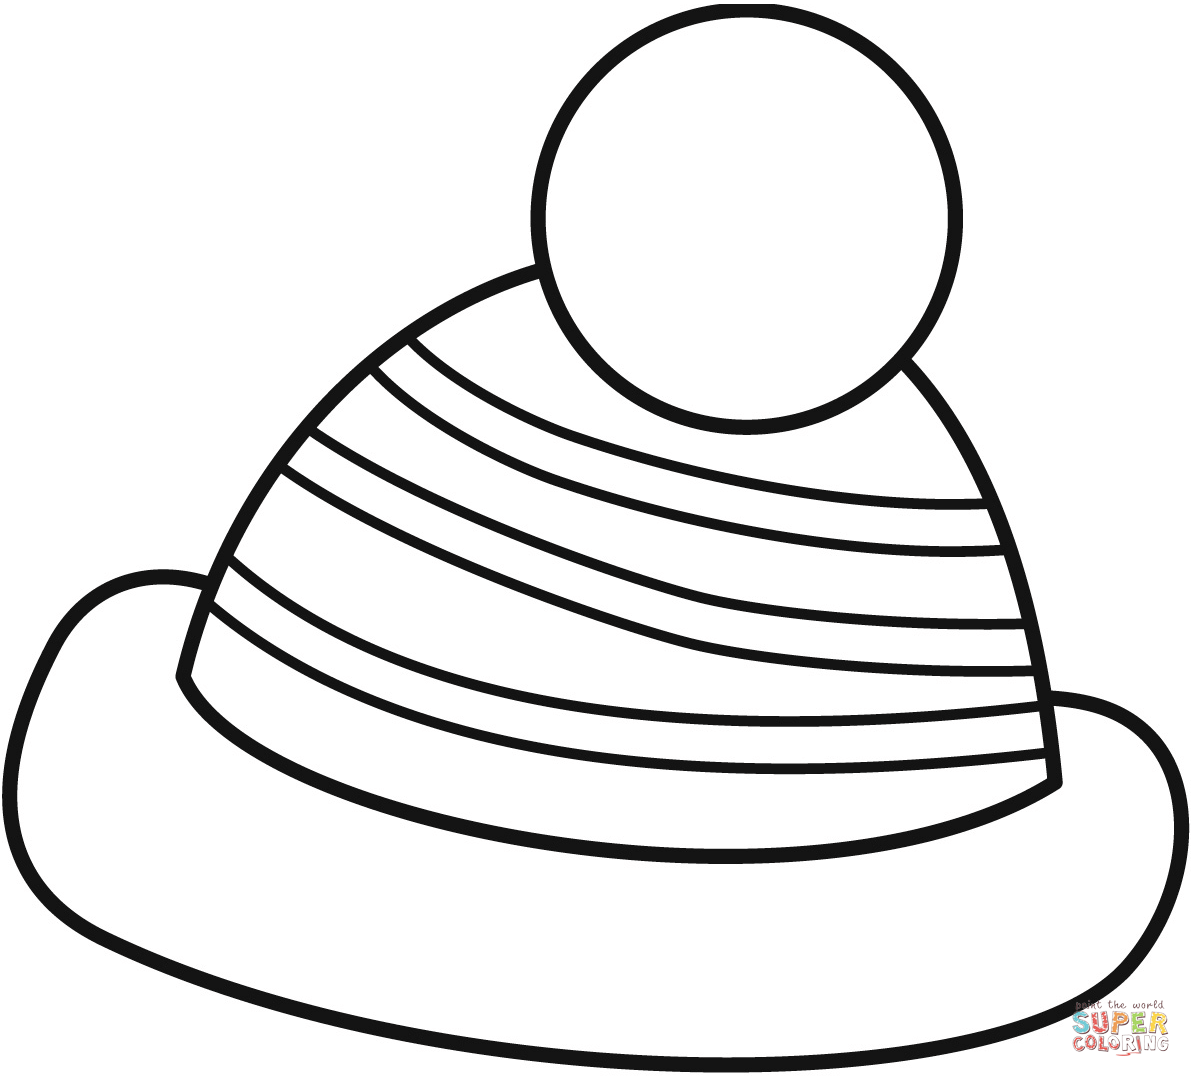 Winter cap coloring page free printable coloring pages